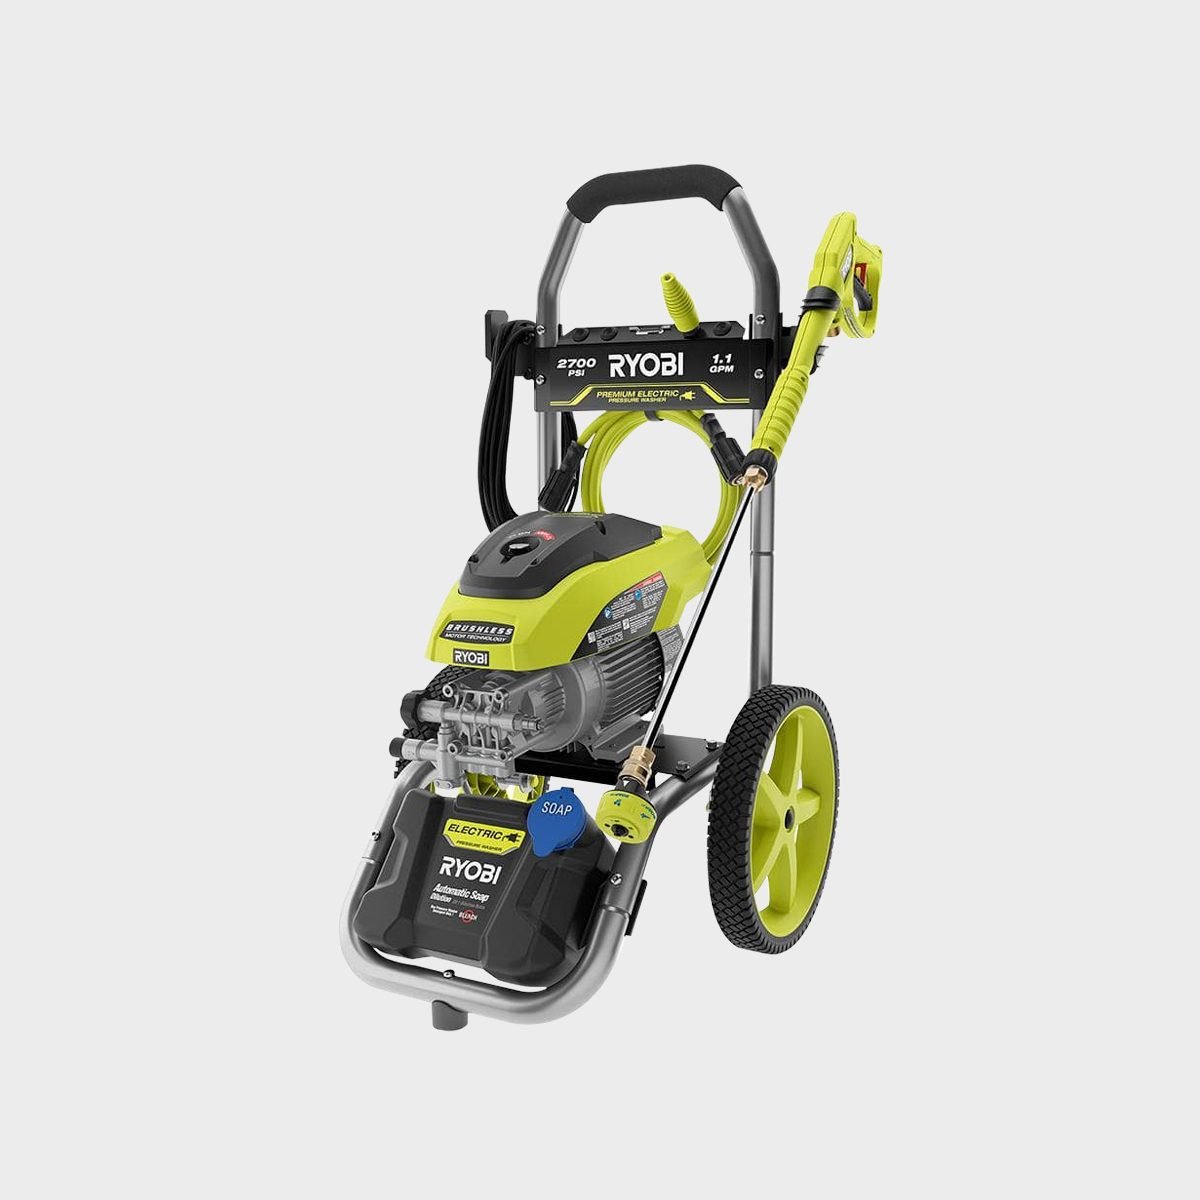  We Tried This Ryobi Pressure Washer and Our Patio Has Never Looked So Clean